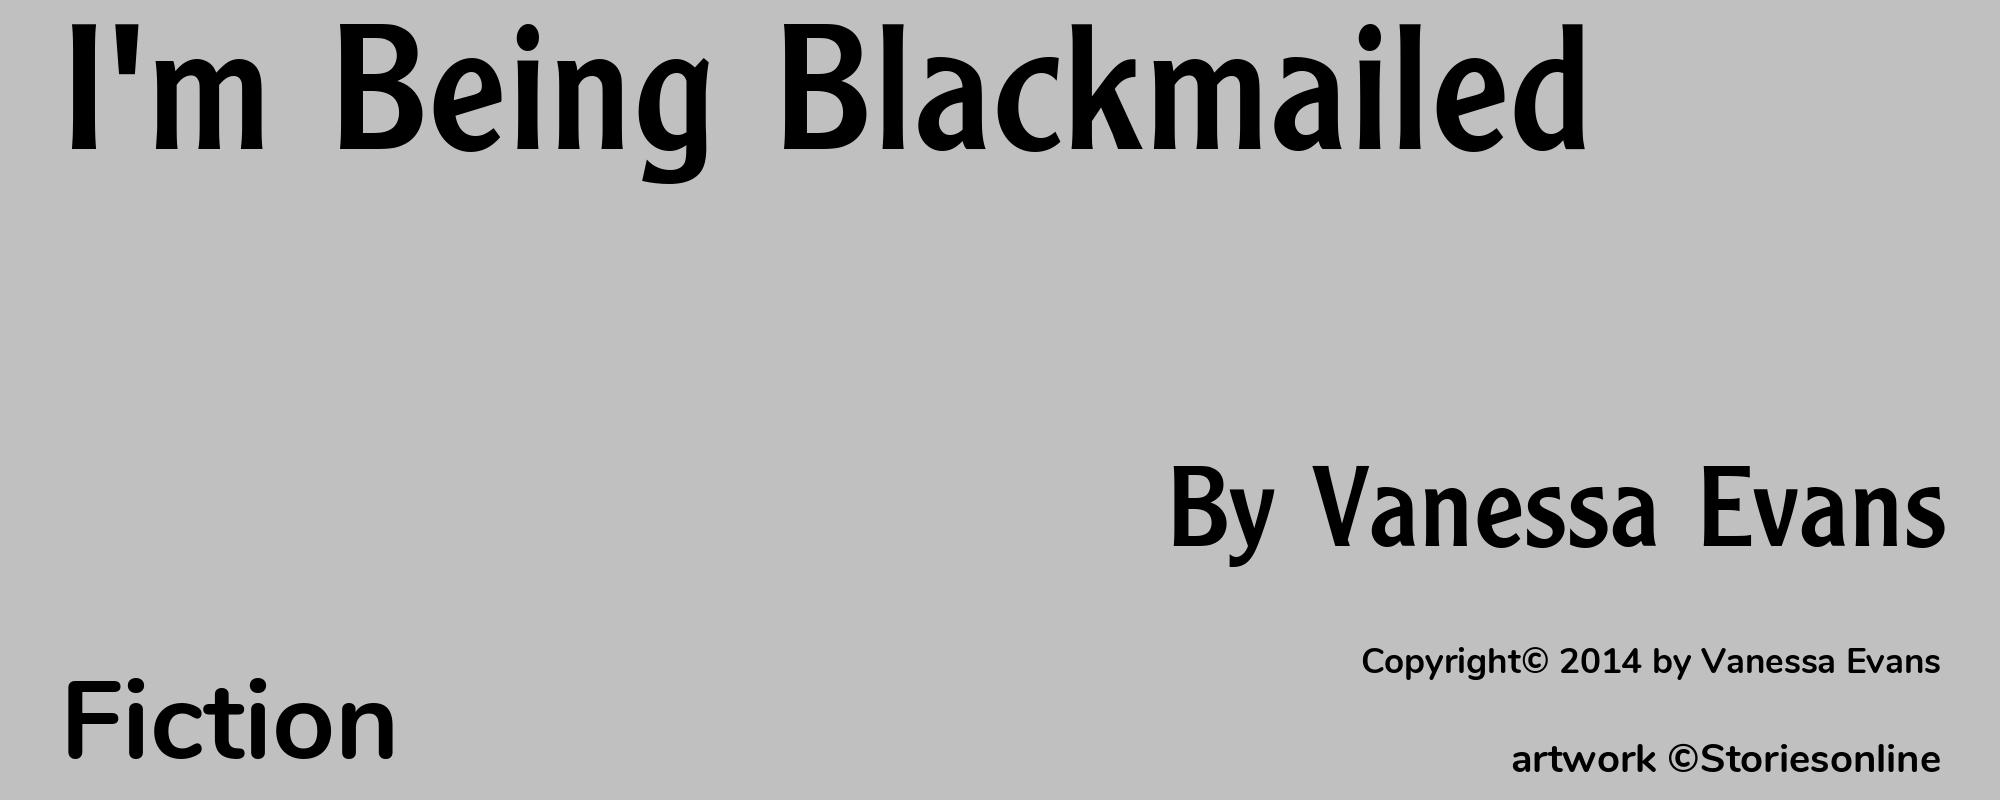 I'm Being Blackmailed - Cover